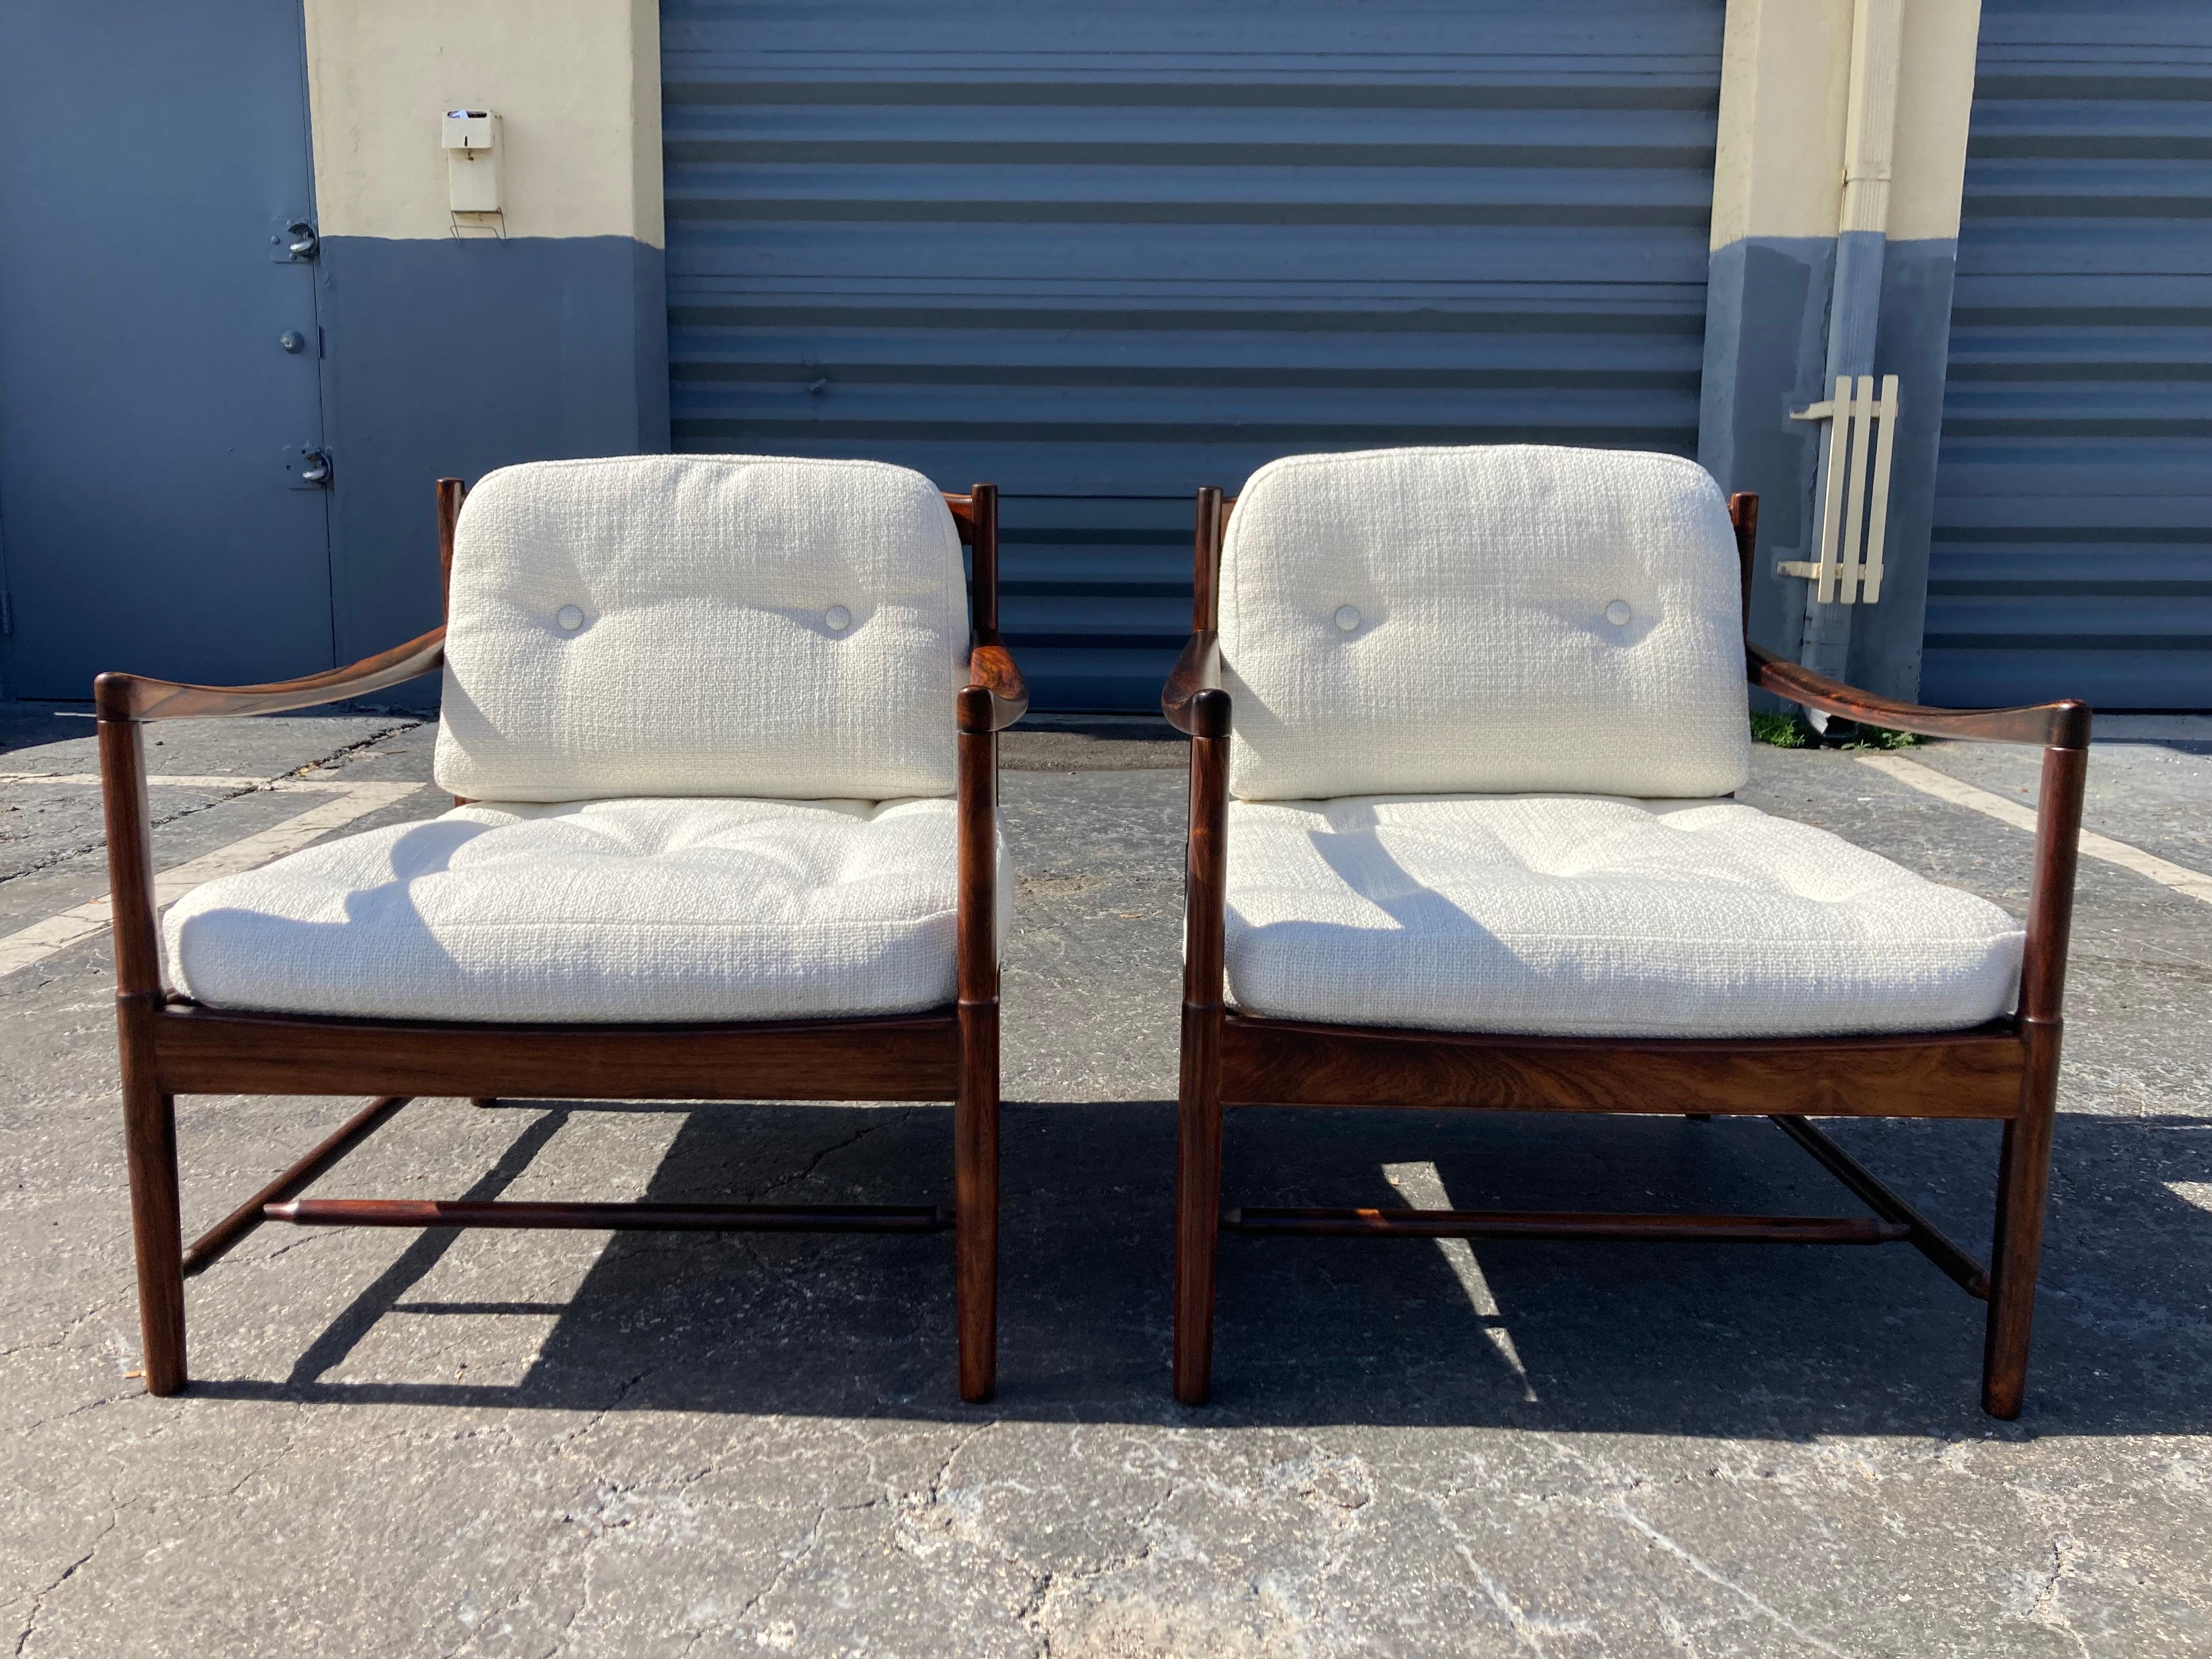 Pair of Rosewood Lounge Chairs Attributed to Kofod Larsen, Danish Modern For Sale 10